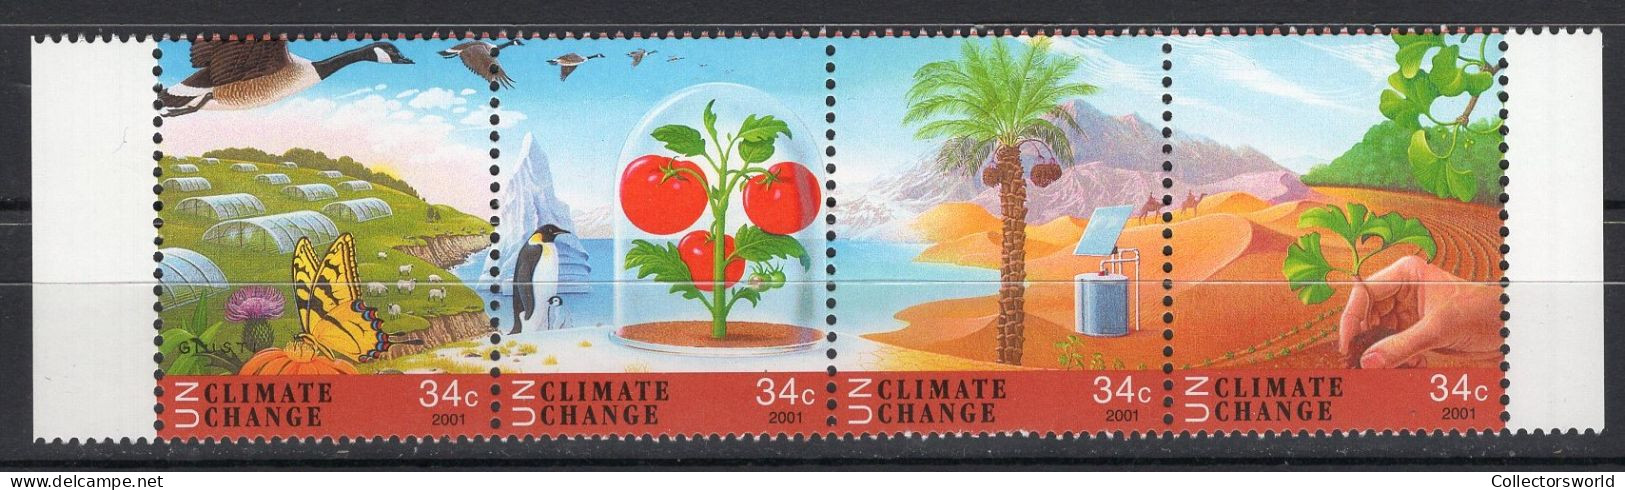 United Nations UN New York Serie 4v 2001 Climate Change Bird Goose Butterfly Insect Penguin Vegetables Camel MNH - Unused Stamps